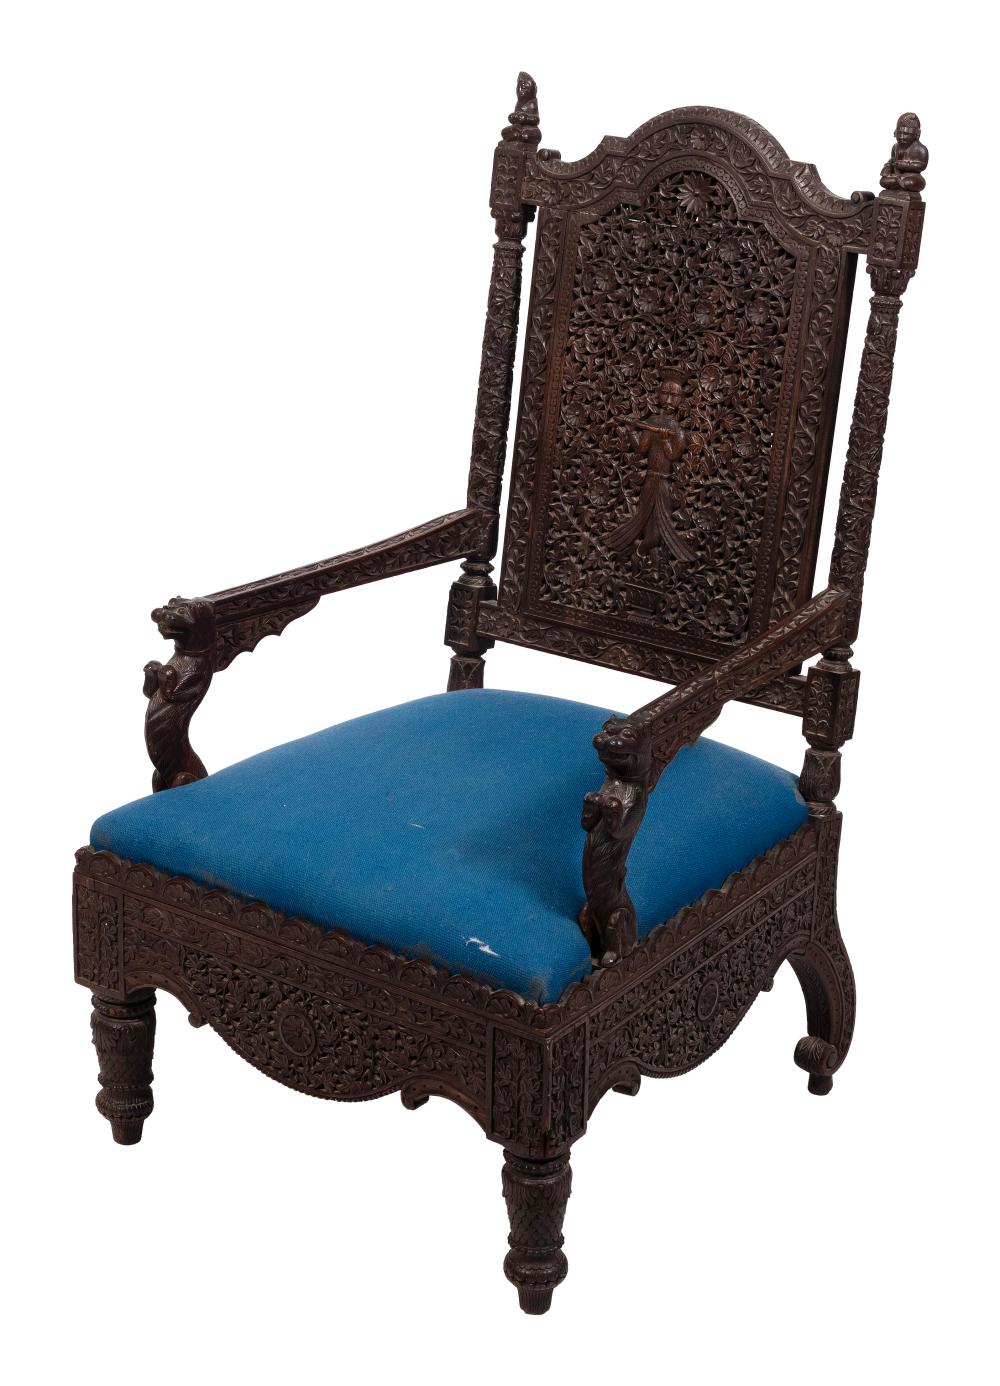 ANGLO-INDIAN ARMCHAIR 19TH CENTURY